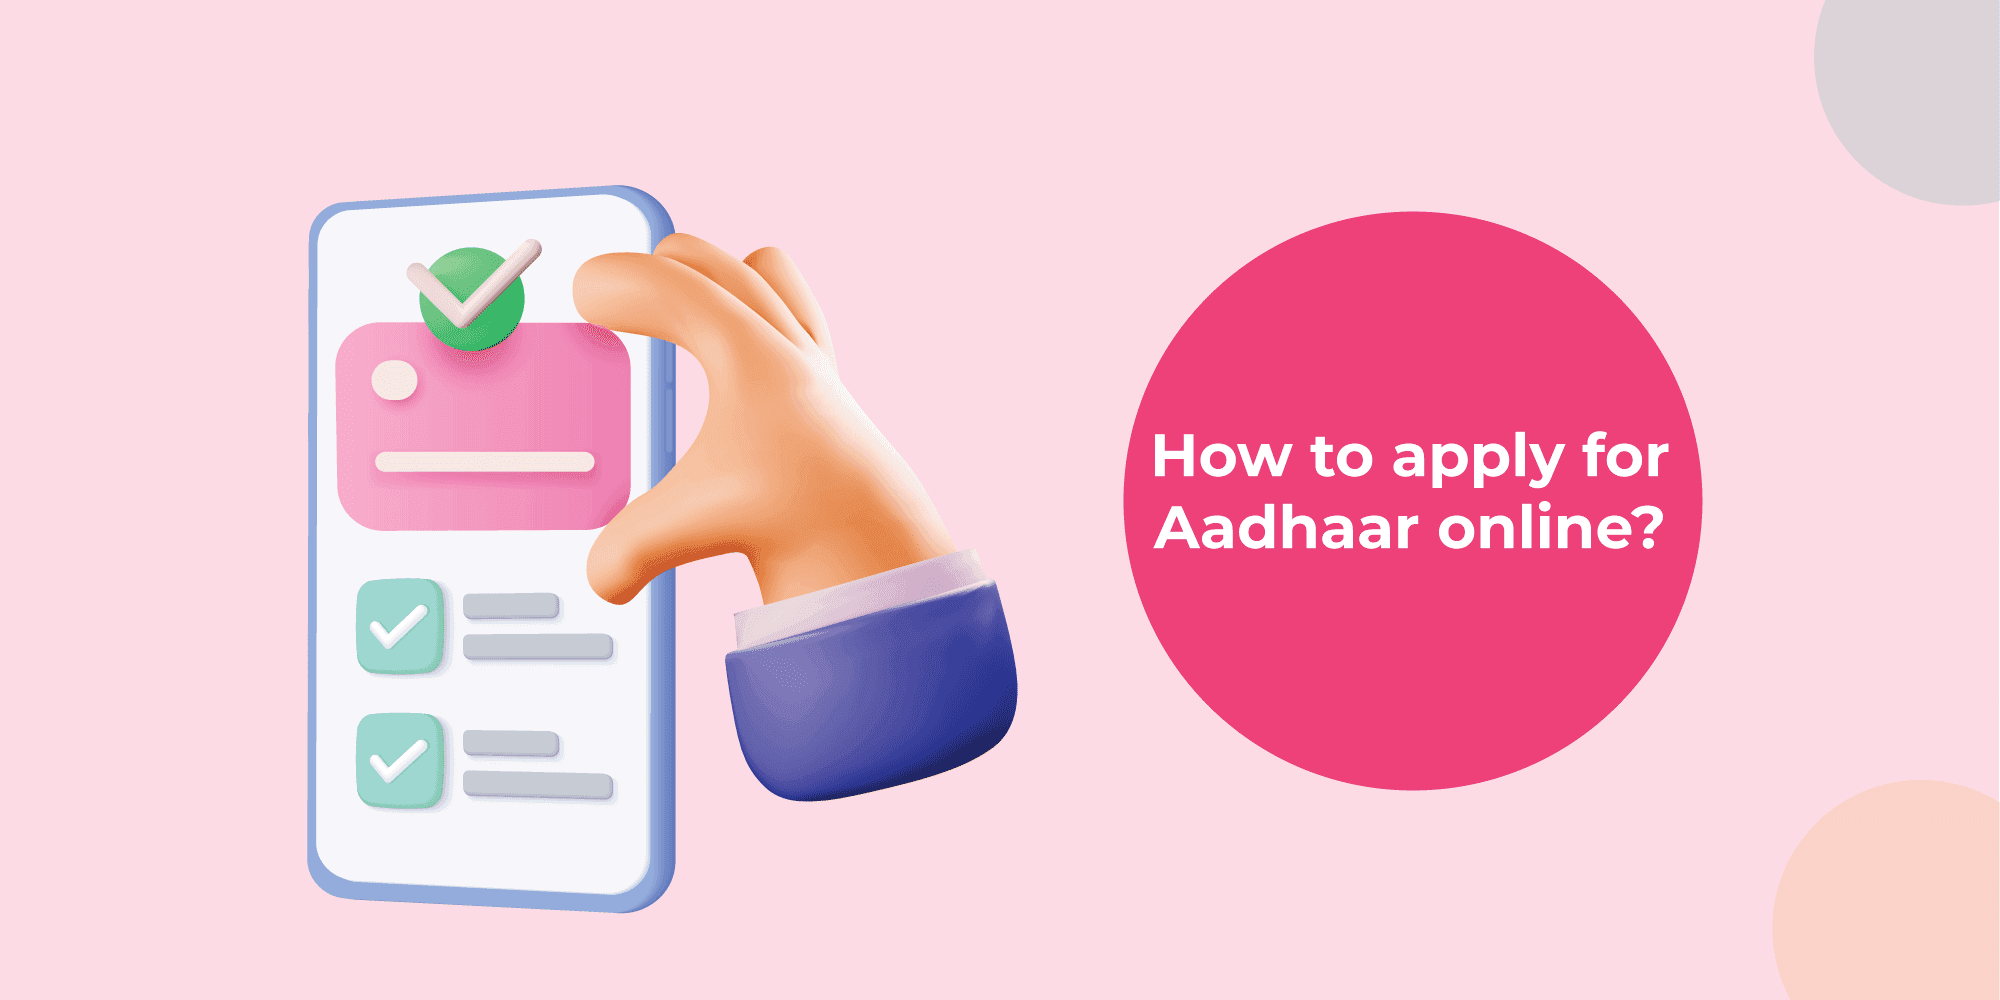 How to apply for a new Aadhaar card and check status online?